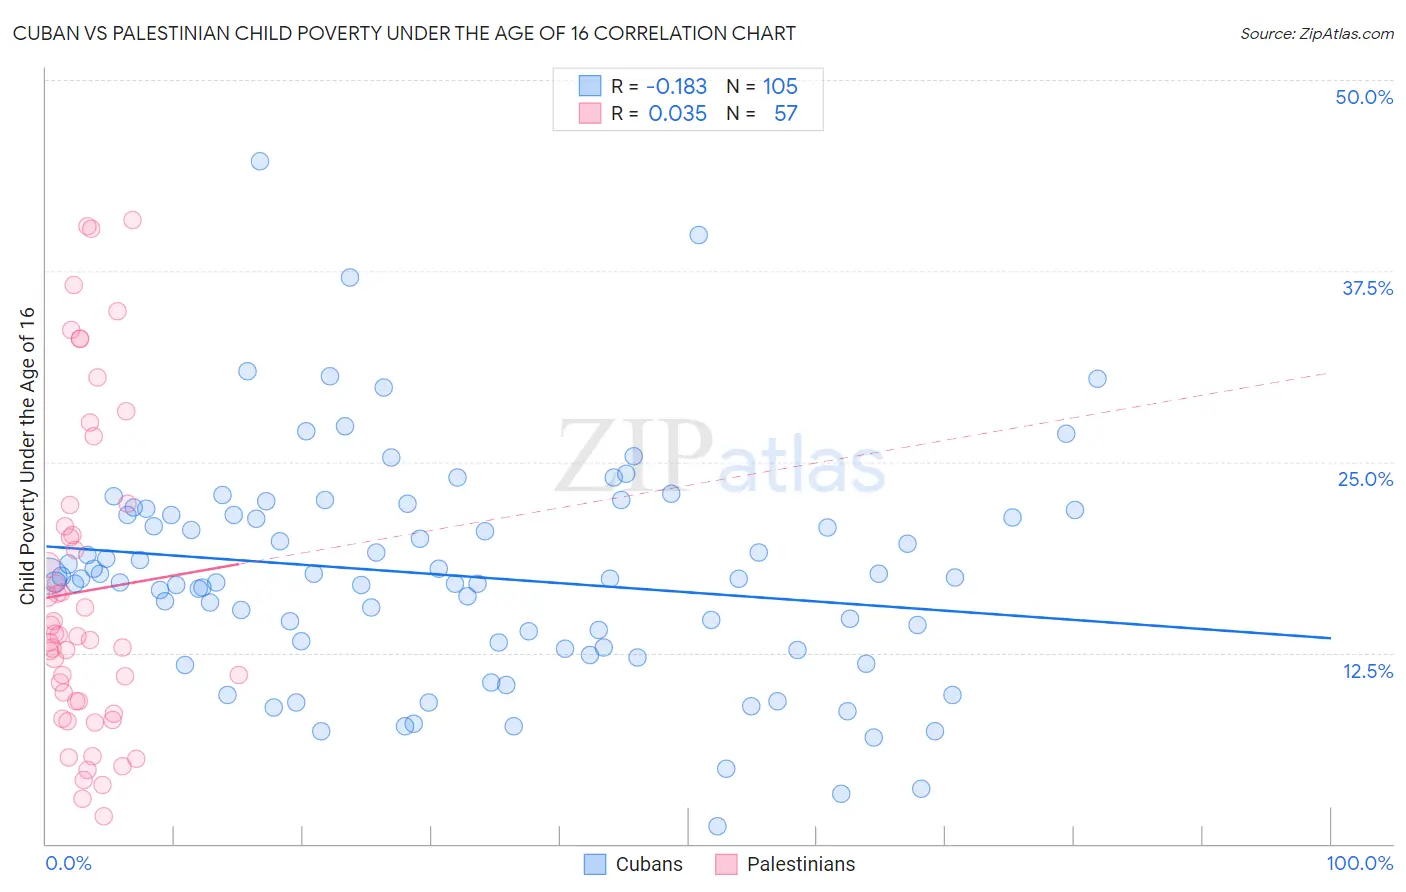 Cuban vs Palestinian Child Poverty Under the Age of 16